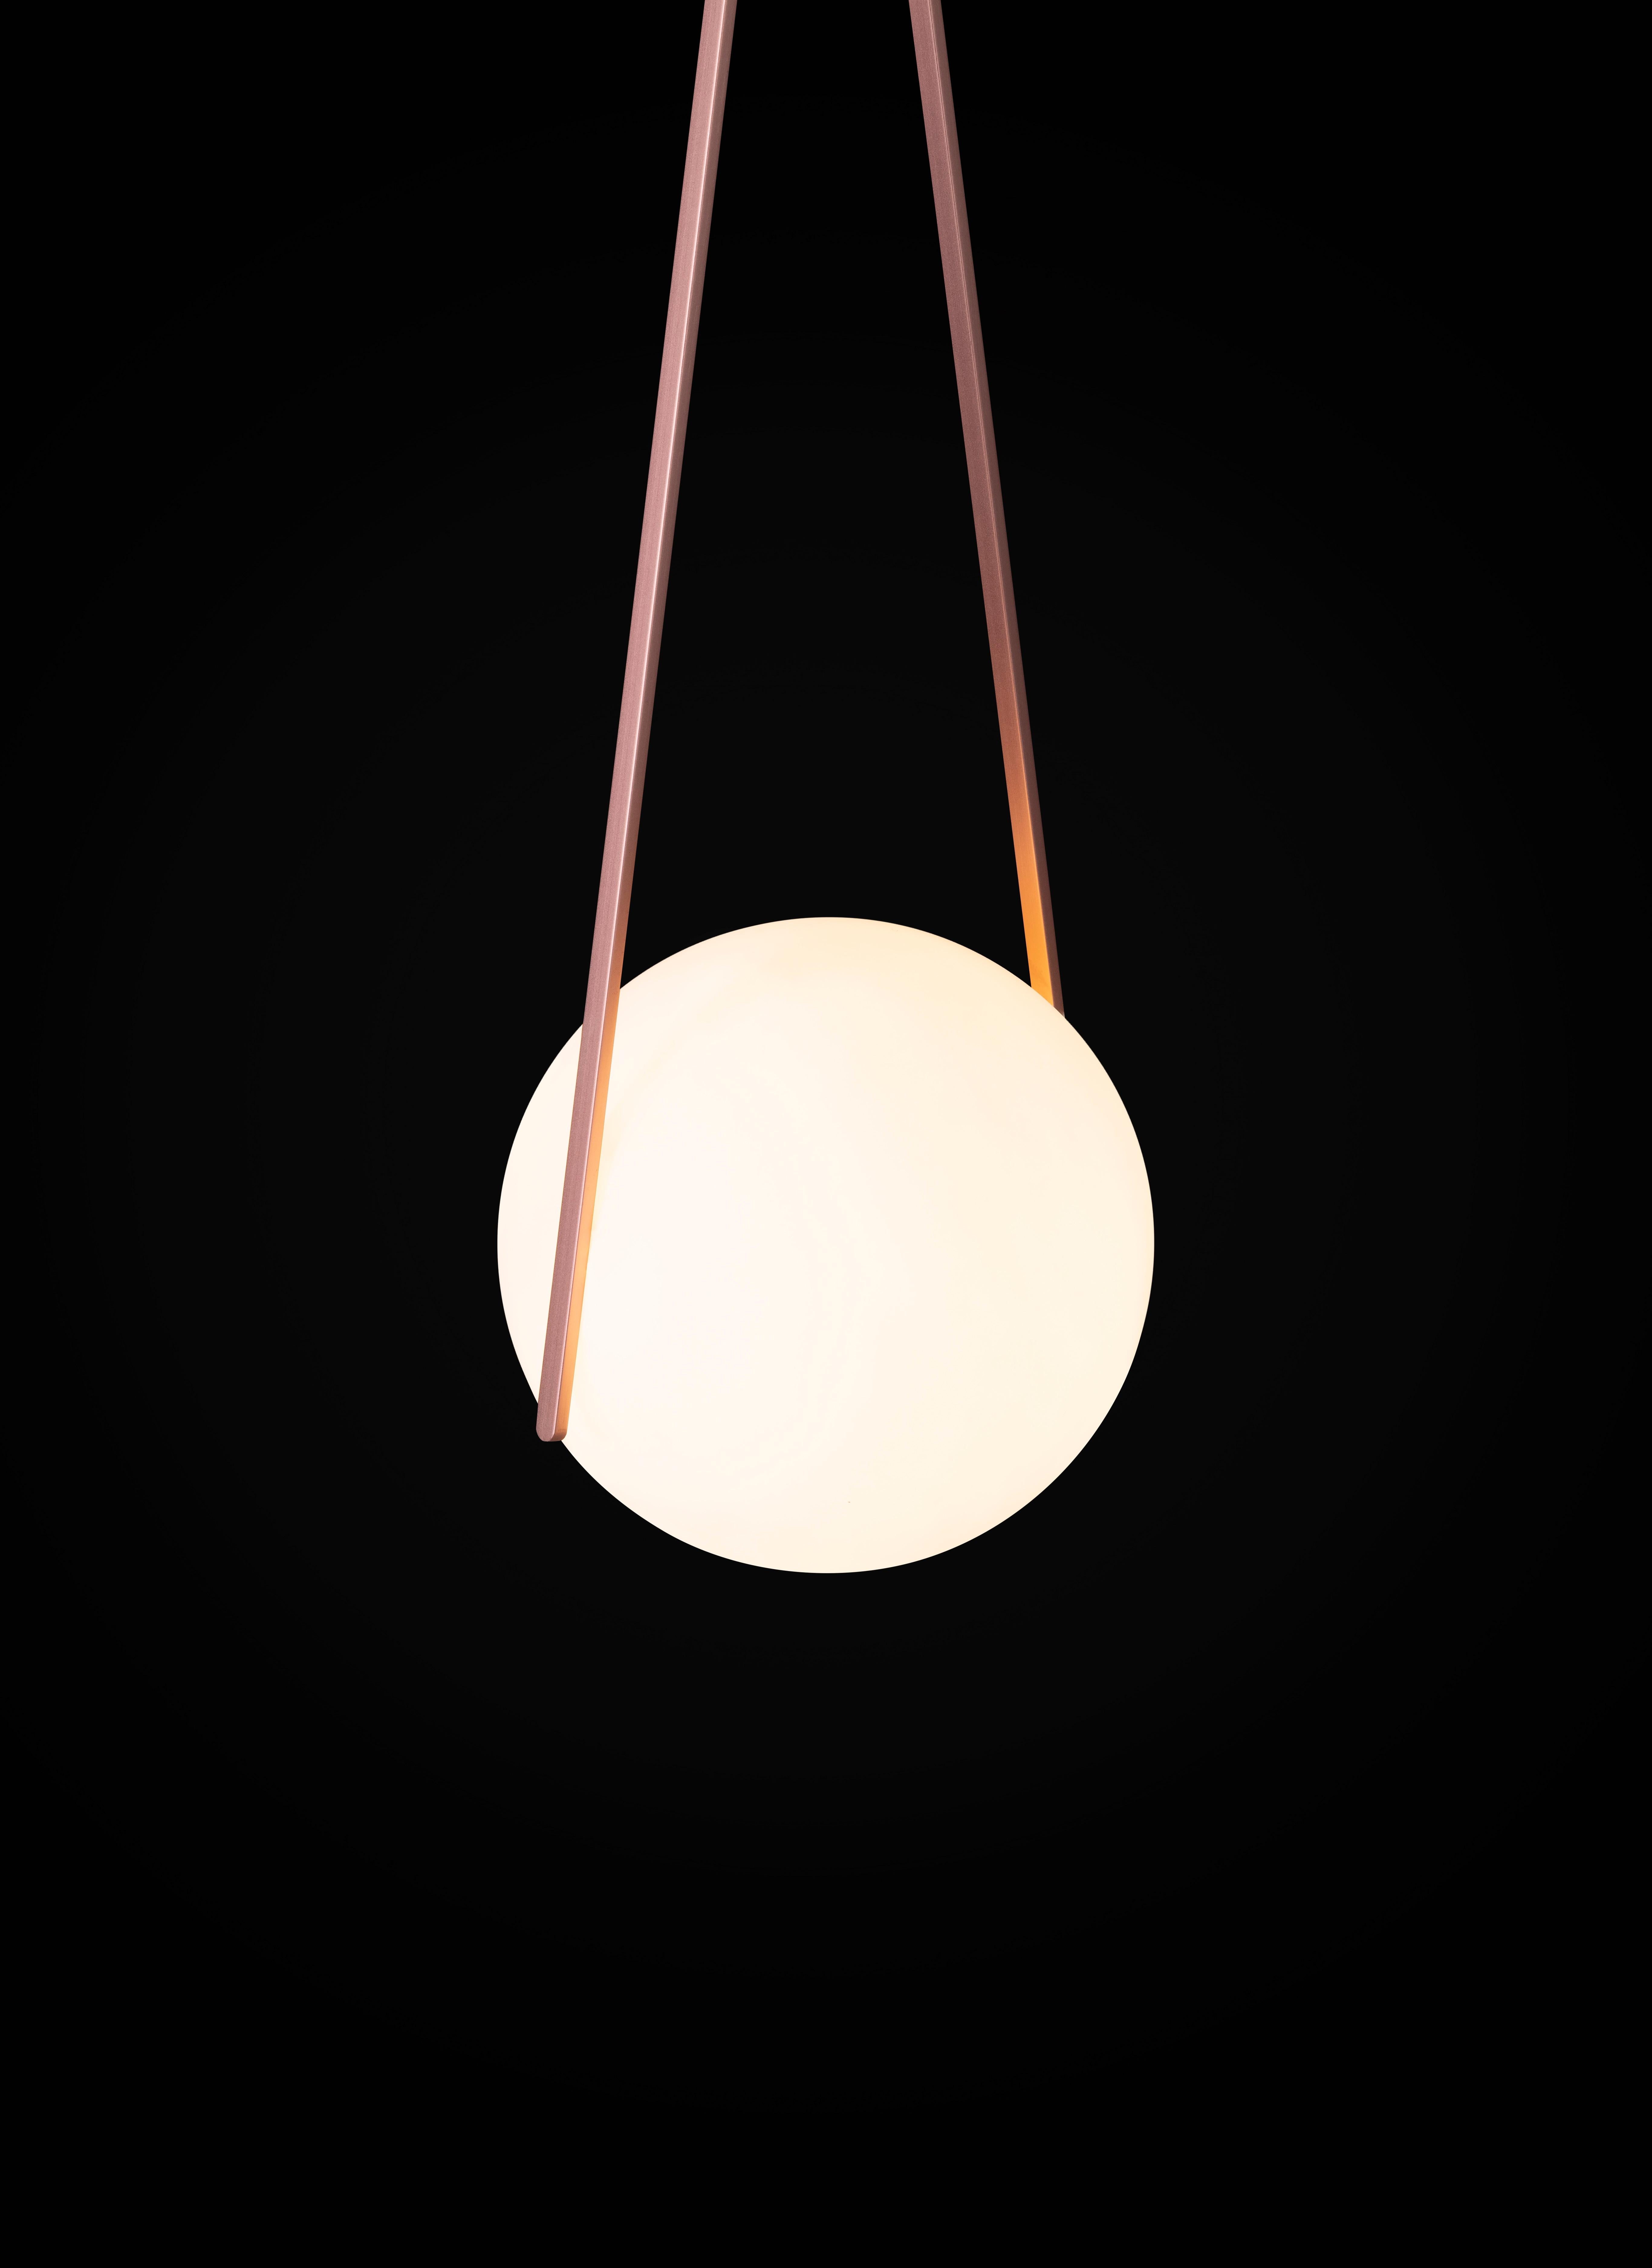 Can. Not. Resist! The NomNom Light by Odin Visser is a contemporary lighting design that puts a smile on your face and a tingle in your belly. This modestly sized suspension light is the perfect example of the art of omission, while remaining